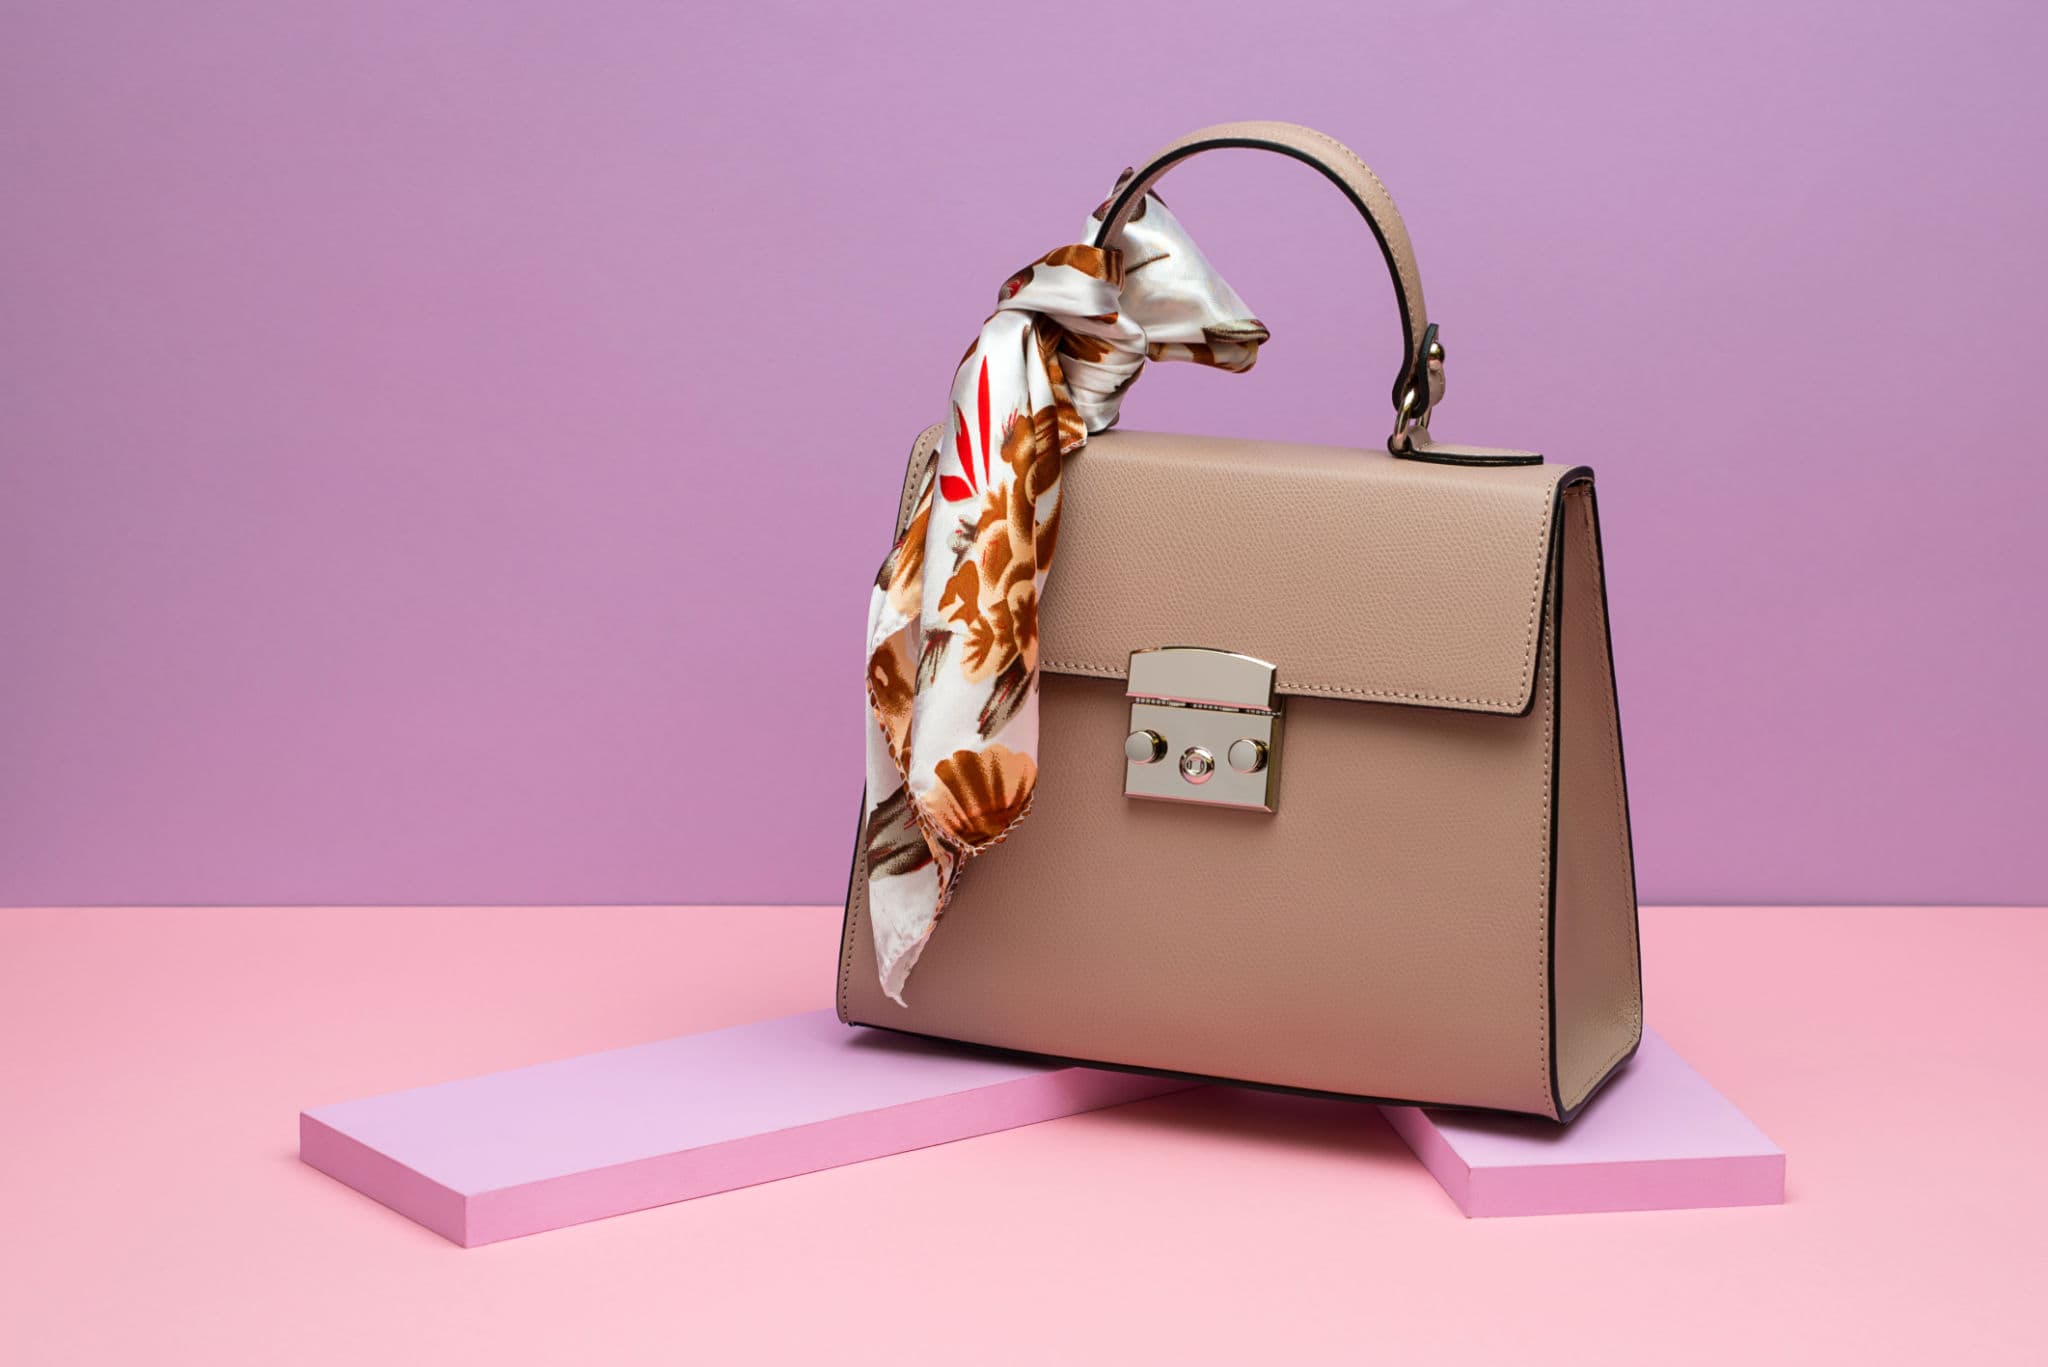 35 designer handbags that will stand the test of time  Investment buys